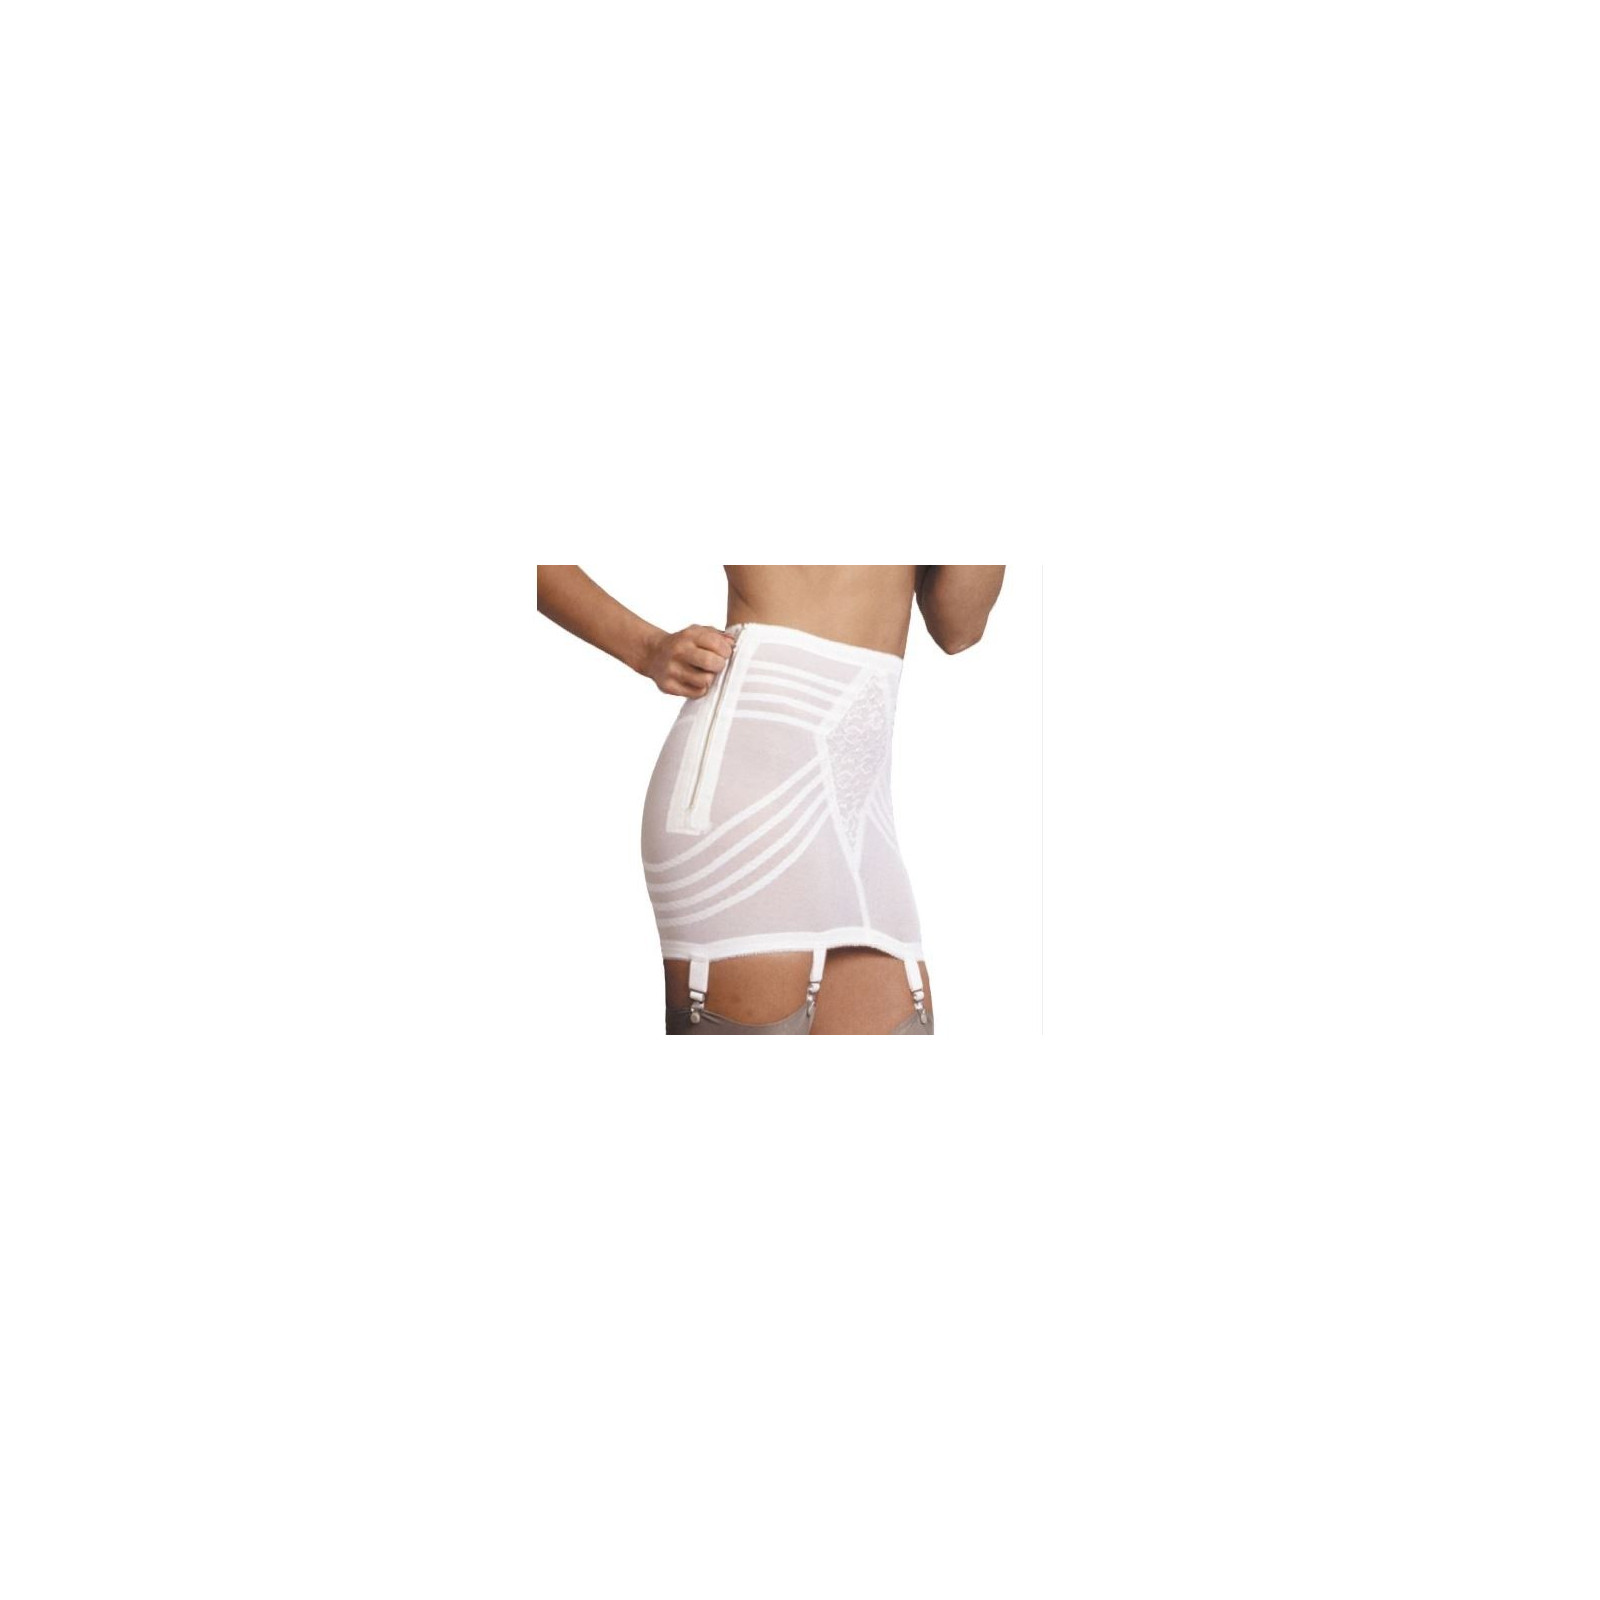 Rago 1361 Open bottom Girdle White with garters & stockings Firm Shaping to  8X - jersimport